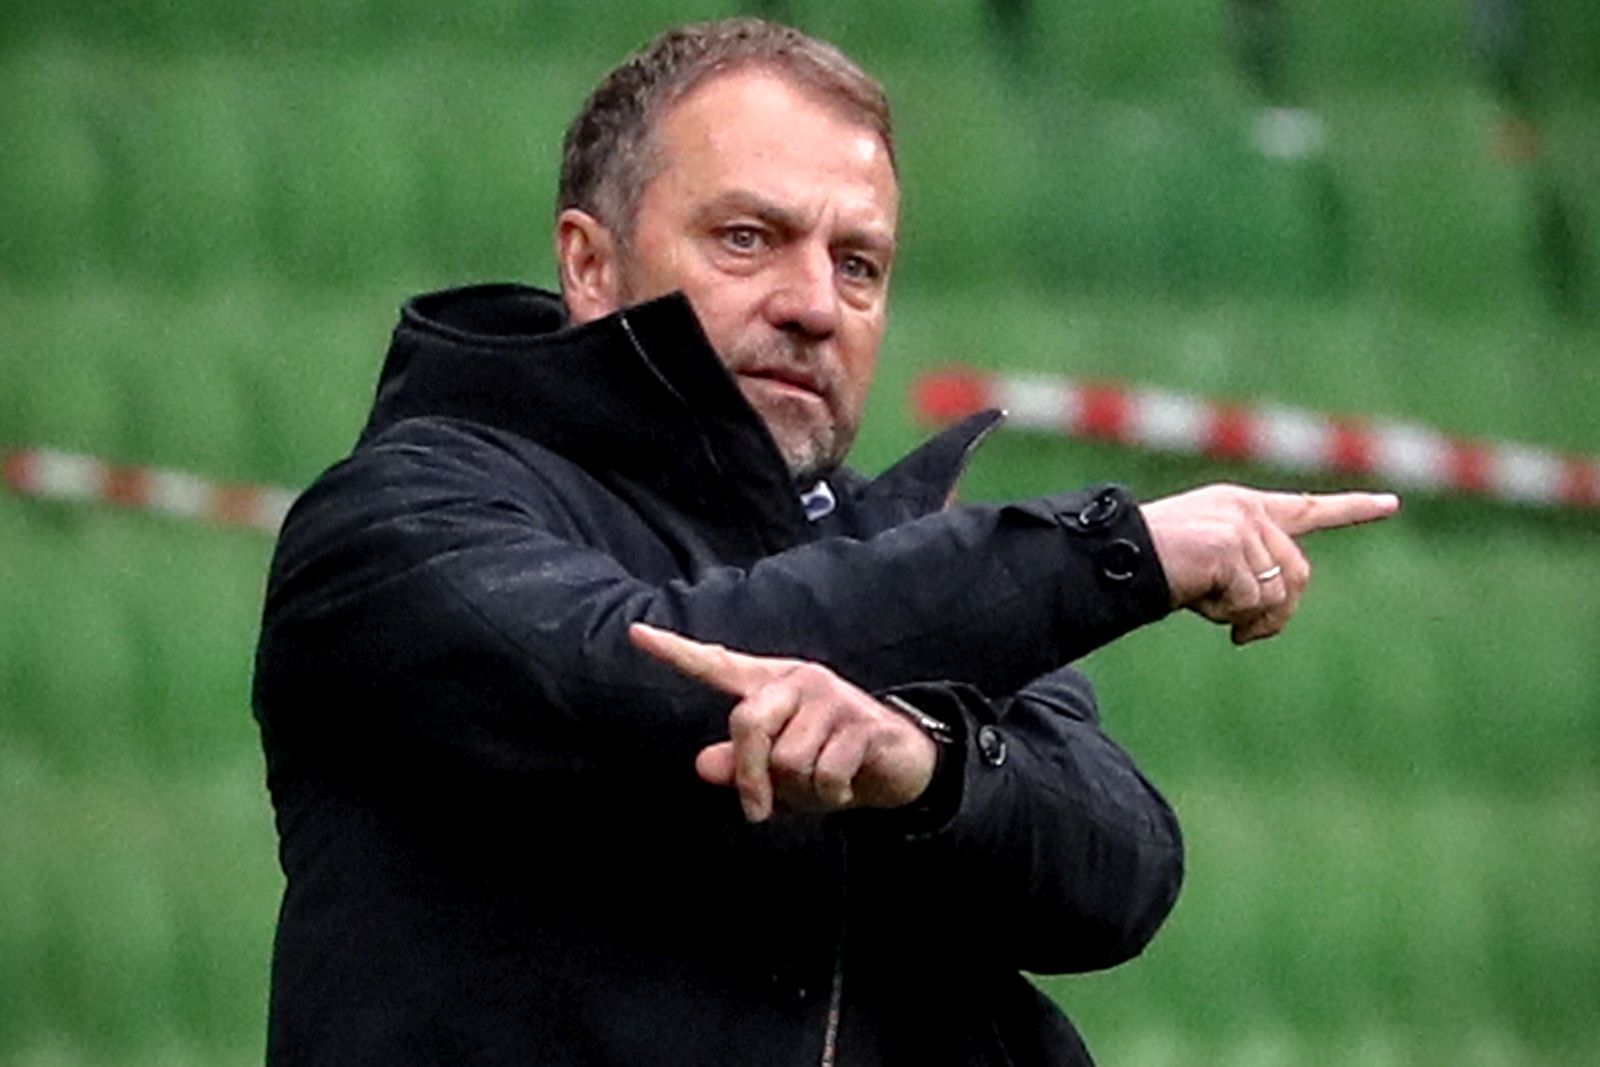 epa09141885 (FILE) Bayern's head coach Hansi Flick gestures during the German Bundesliga soccer match between Werder Bremen and Bayern Muenchen in Bremen, Germany, 13 March 2021 (reissued on 17 April 2021). 56-year-old FC Bayern Munich manager Hansi Flick is set to leave the club this summer, he announced on 17 April 2021, following the 3-2 win in the German Bundesliga match against Wolfsburg.  EPA/FOCKE STRANGMANN / POOL CONDITIONS - ATTENTION: The DFL regulations prohibit any use of photographs as image sequences and/or quasi-video. *** Local Caption *** 56760379